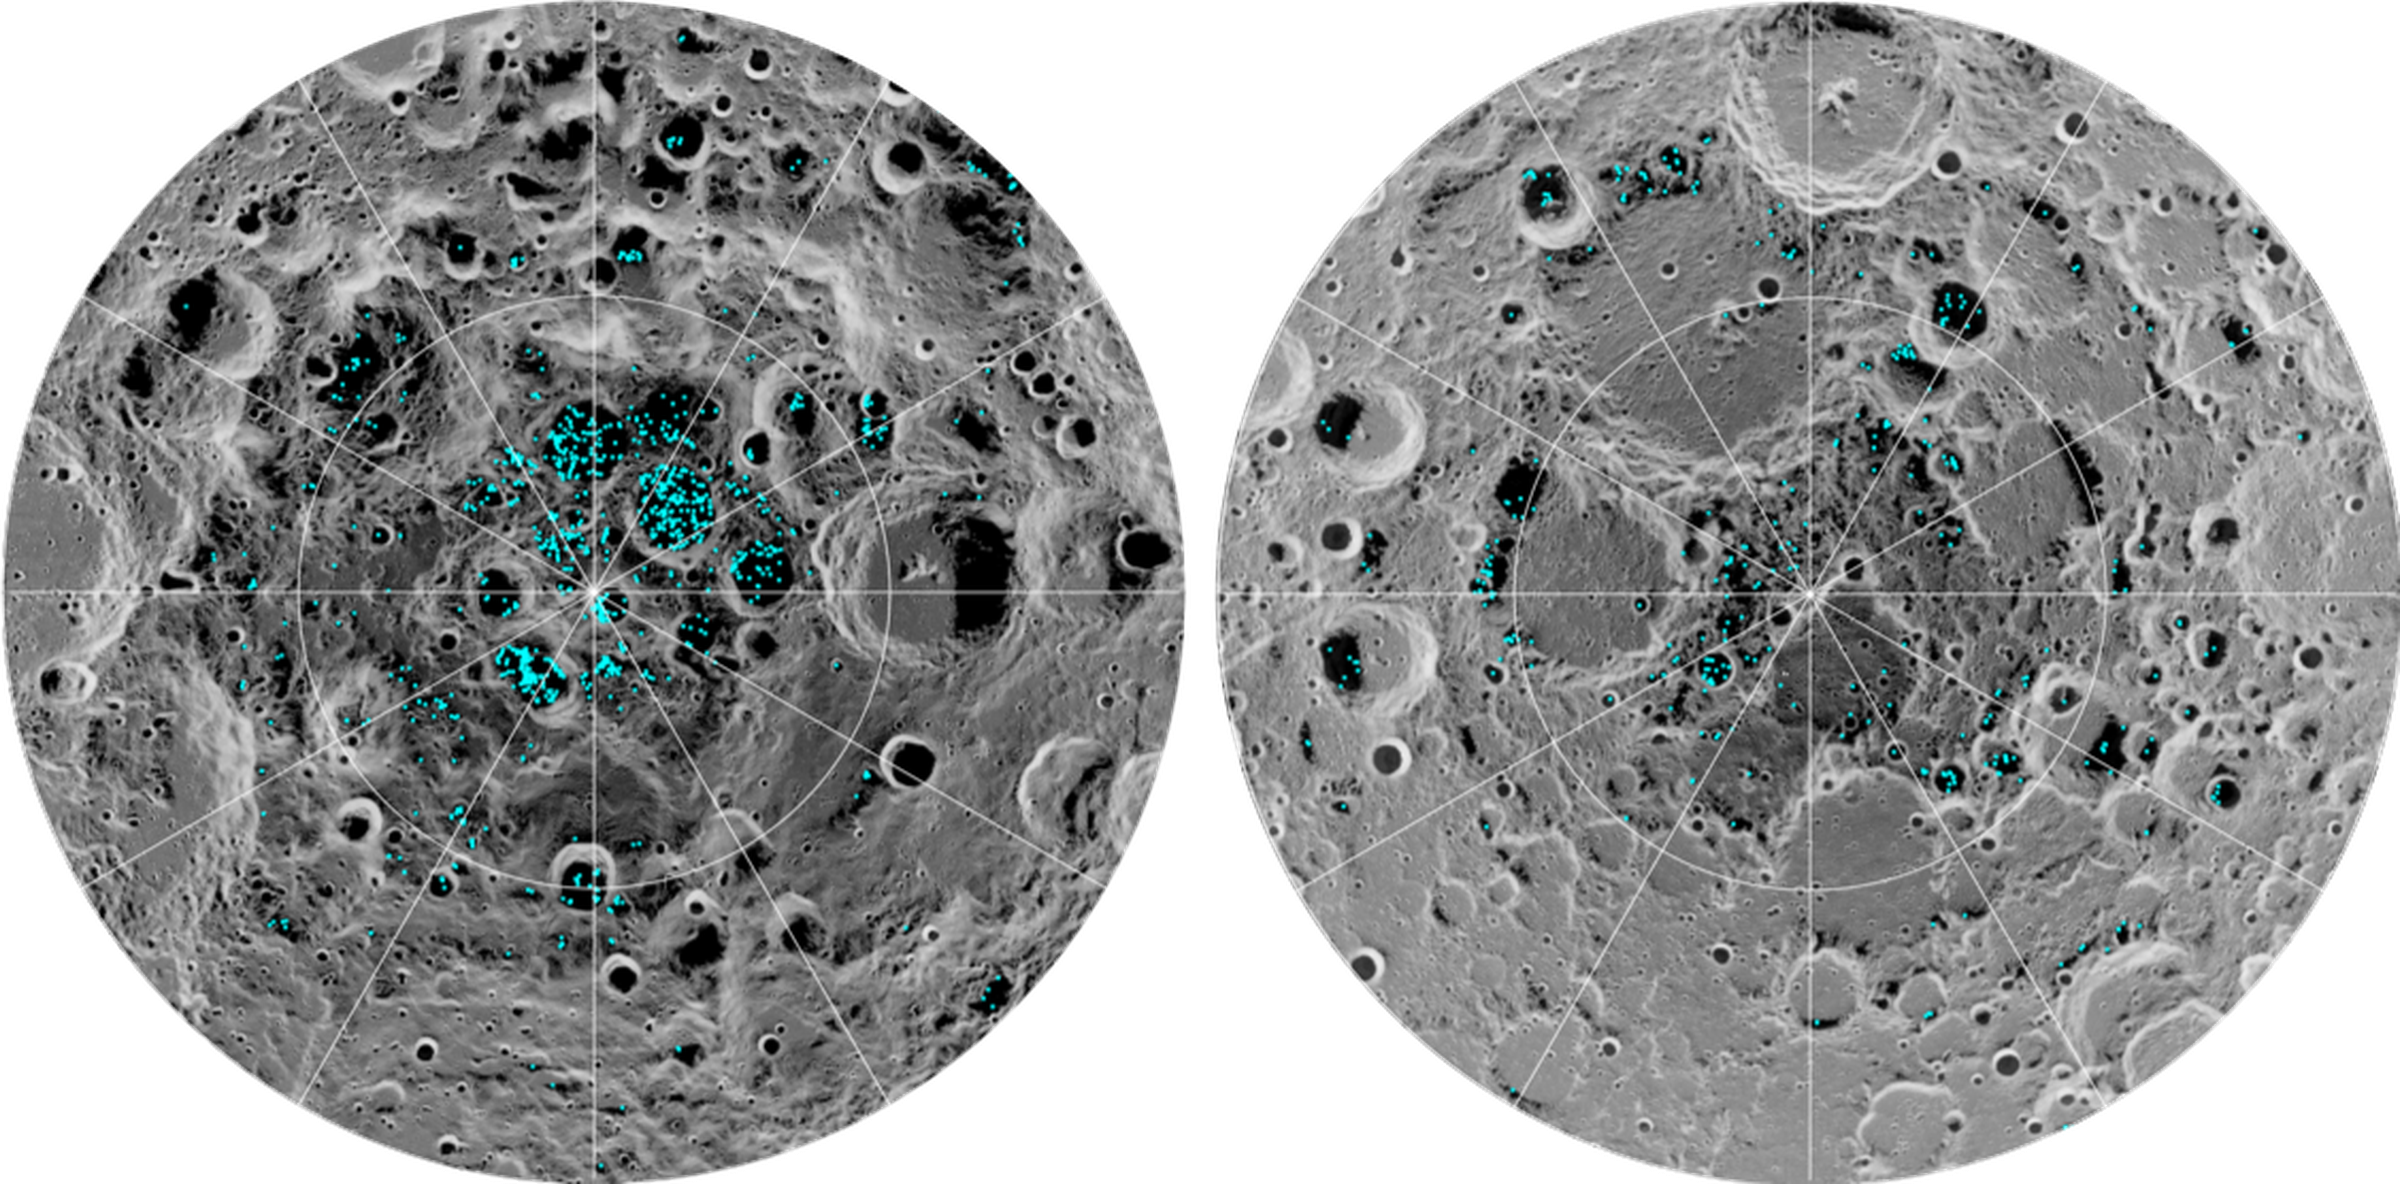 A map of exposed lunar water ice made with data from the Chandrayaan-1 spacecraft.